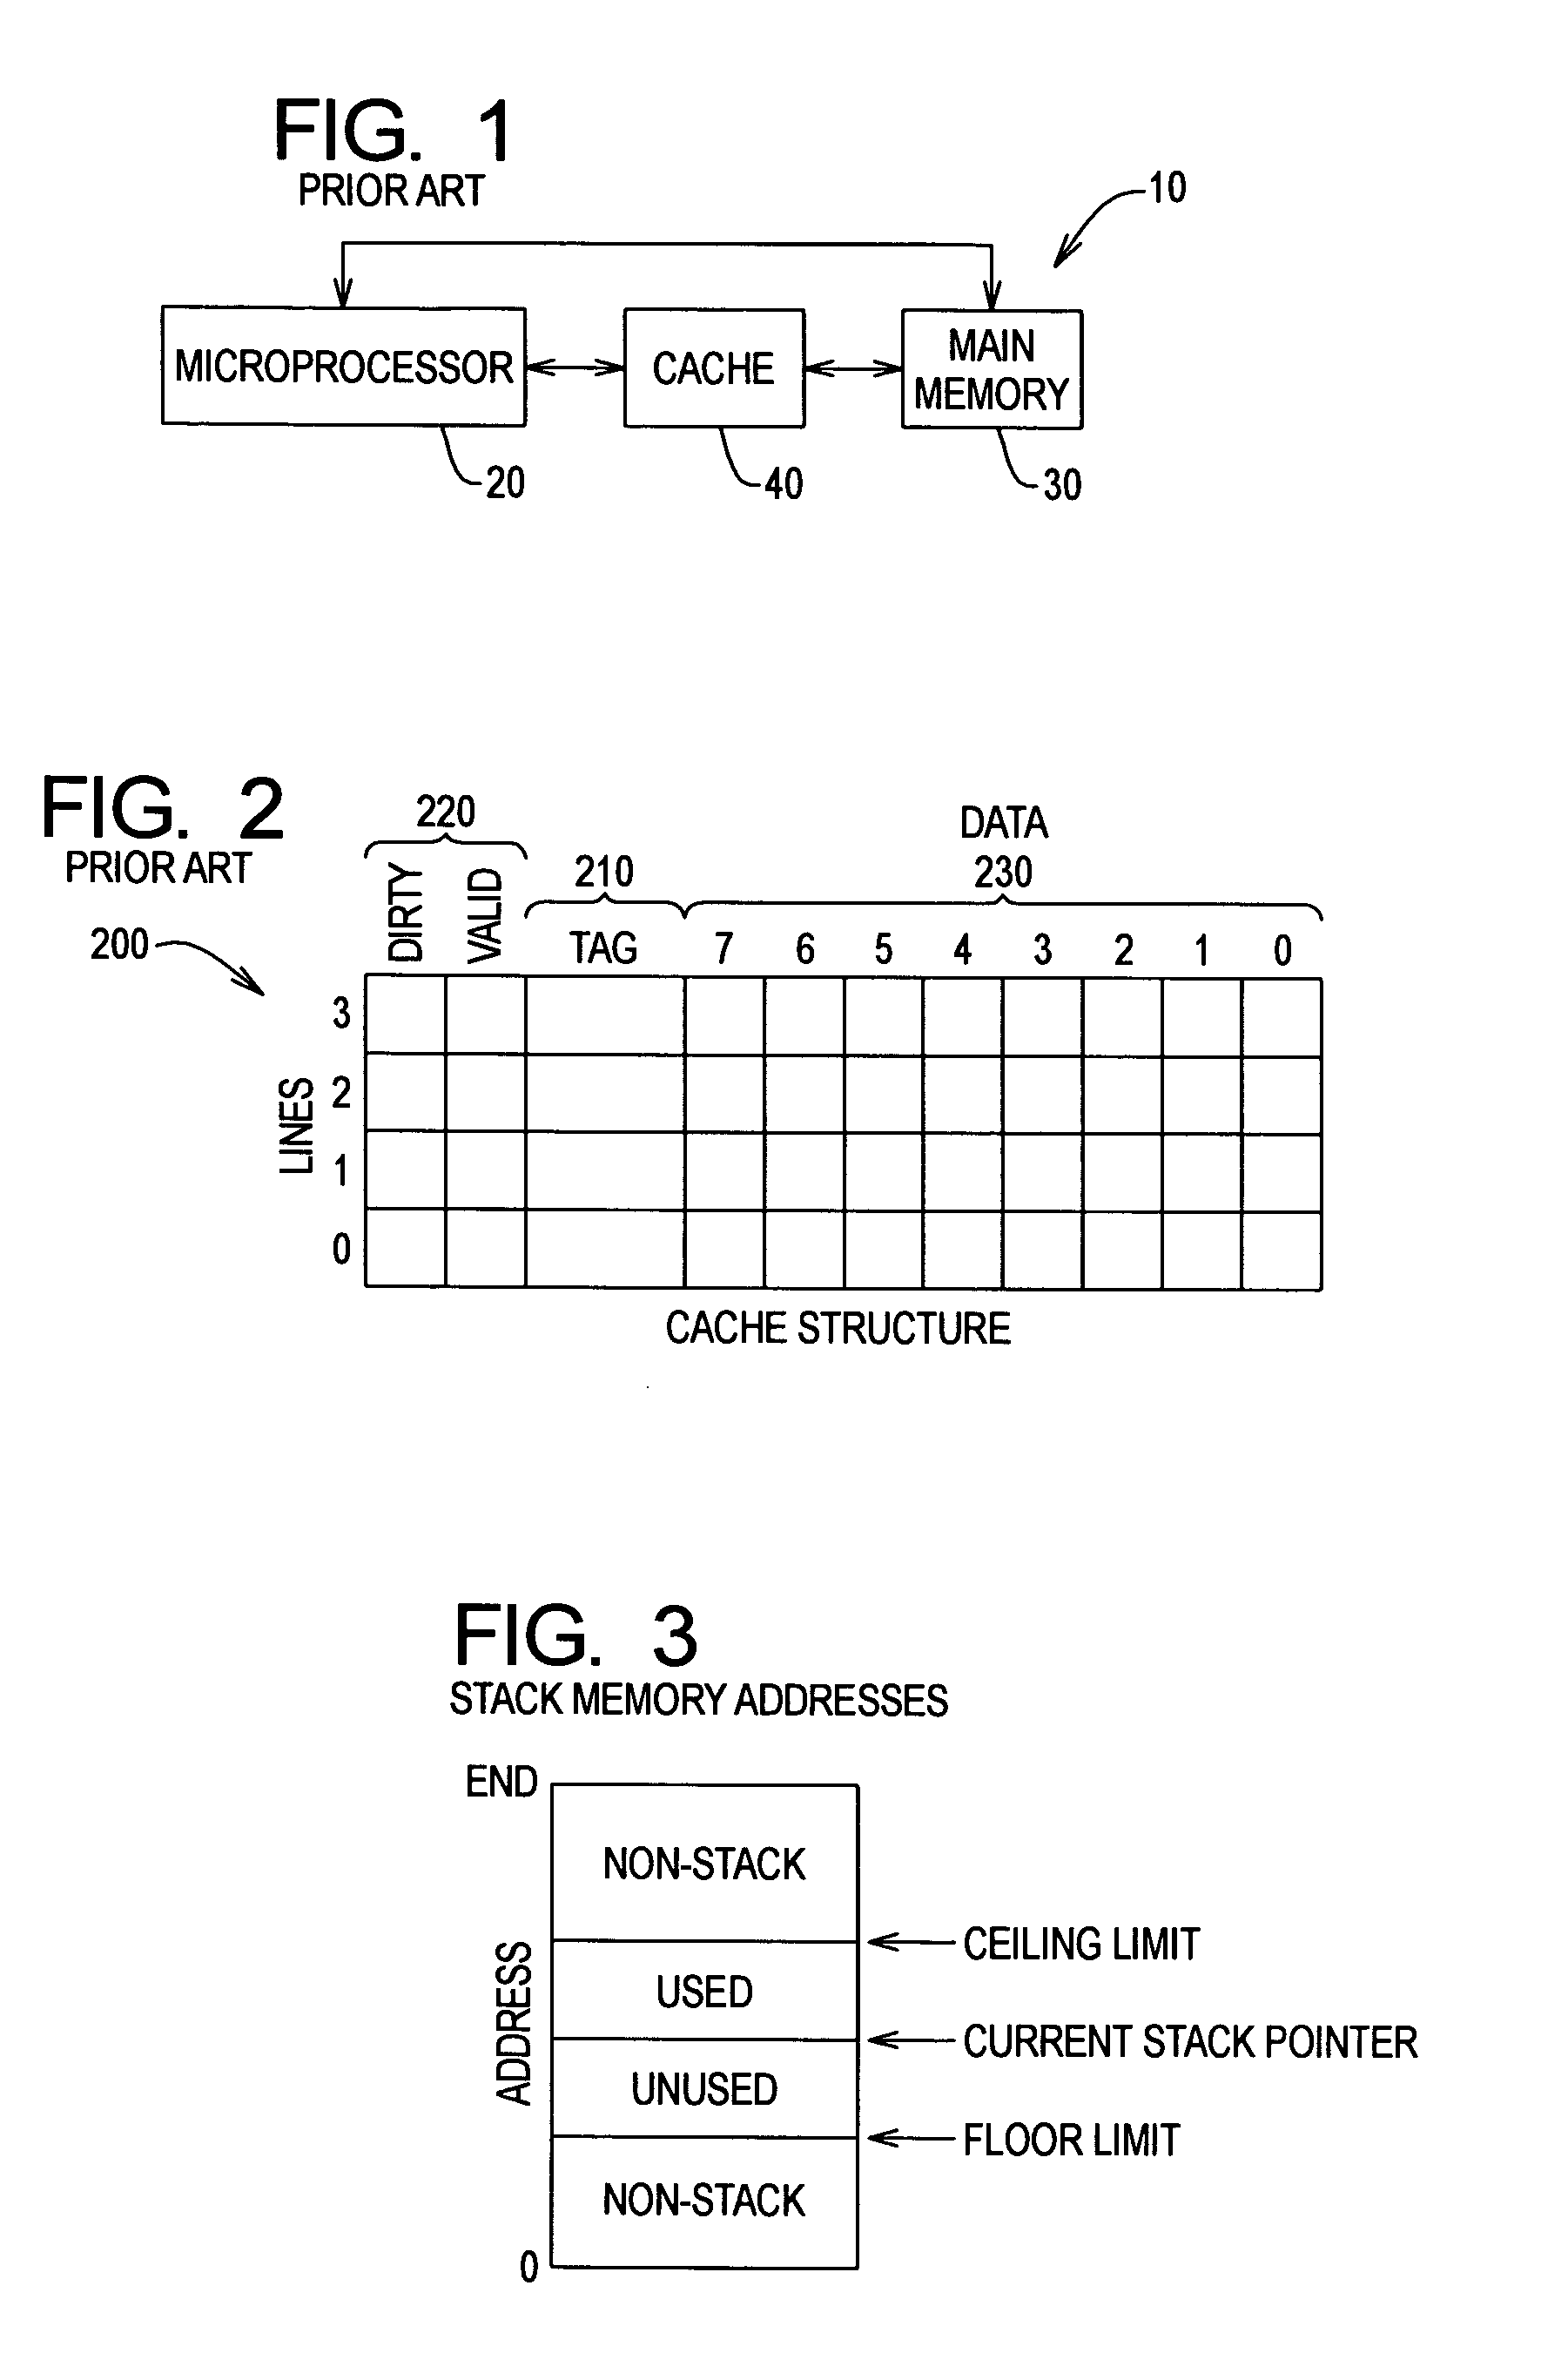 Method for reducing access to main memory using a stack cache